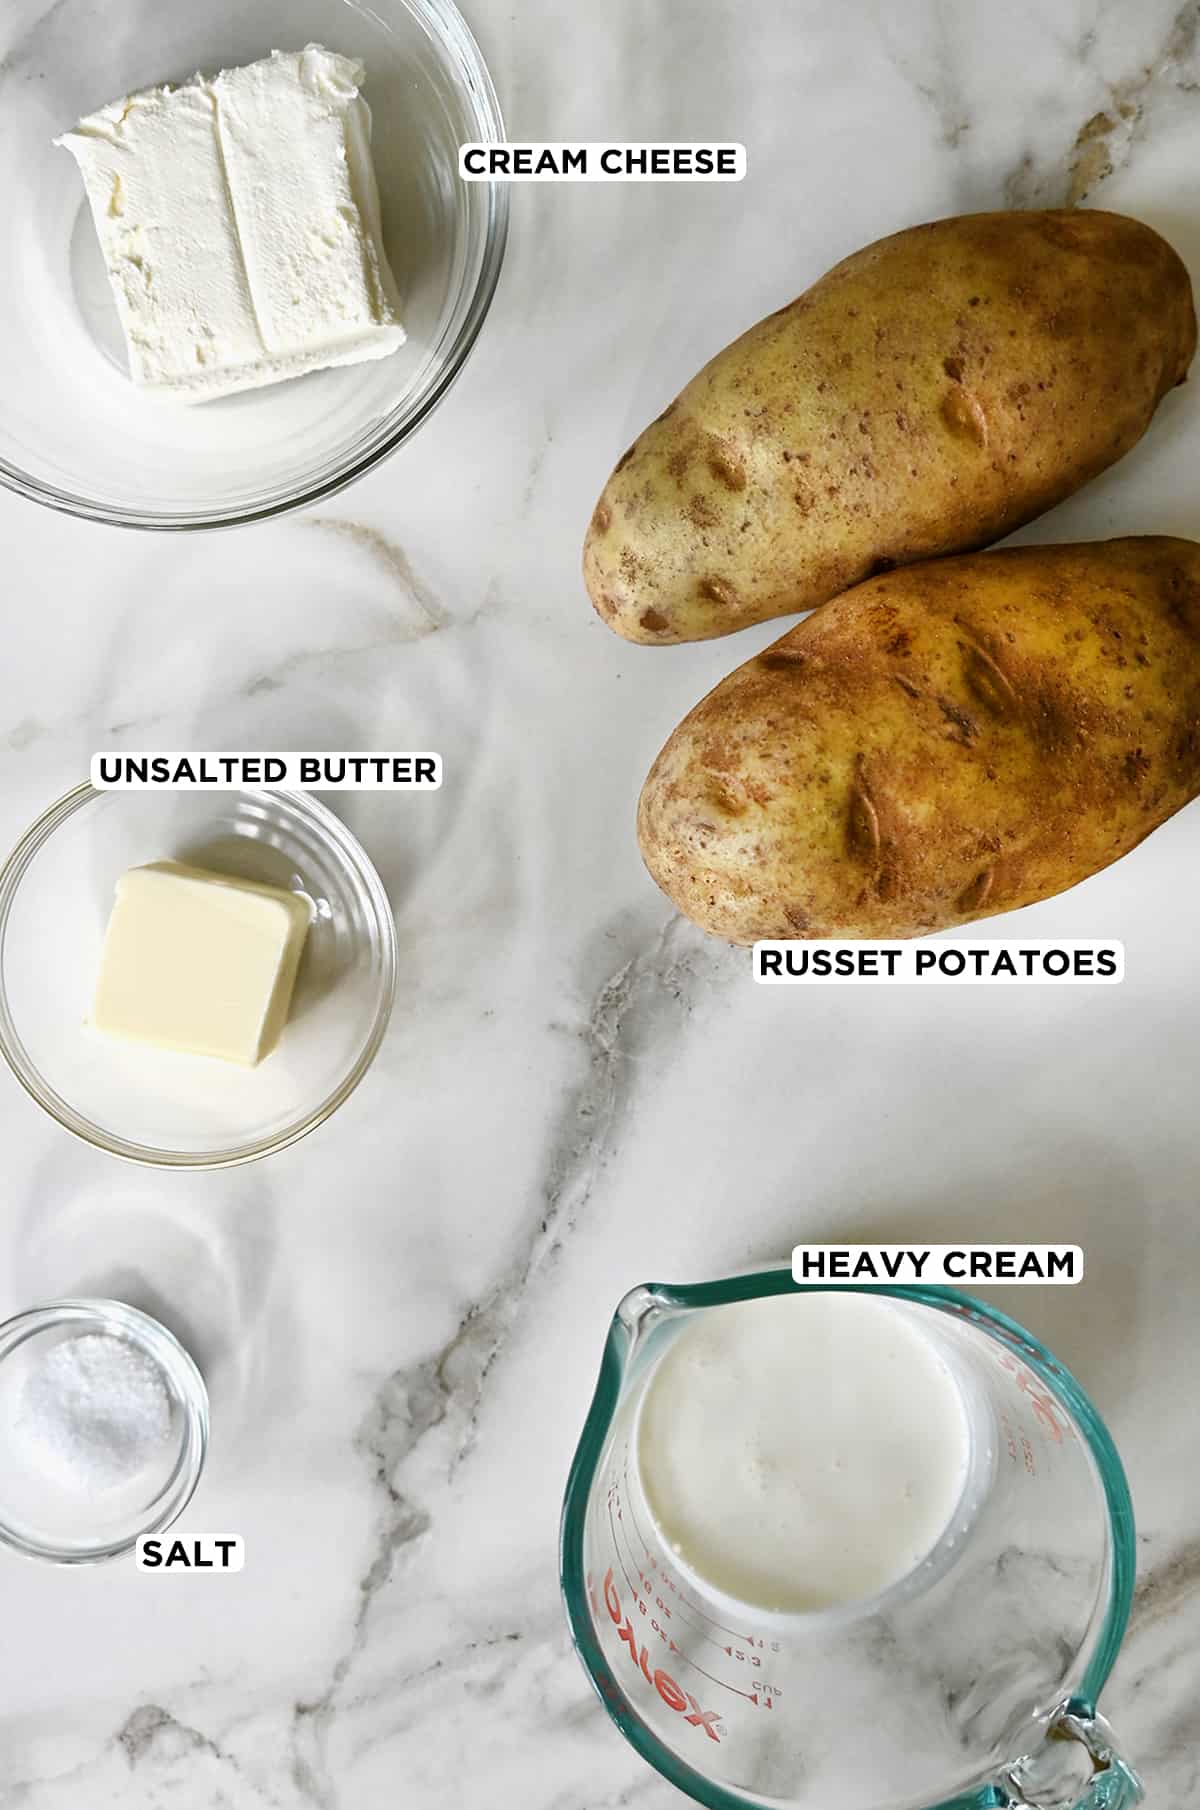 Two Russet potatoes next to various sizes of clear bowls containing cream cheese, butter, heavy cream and salt.